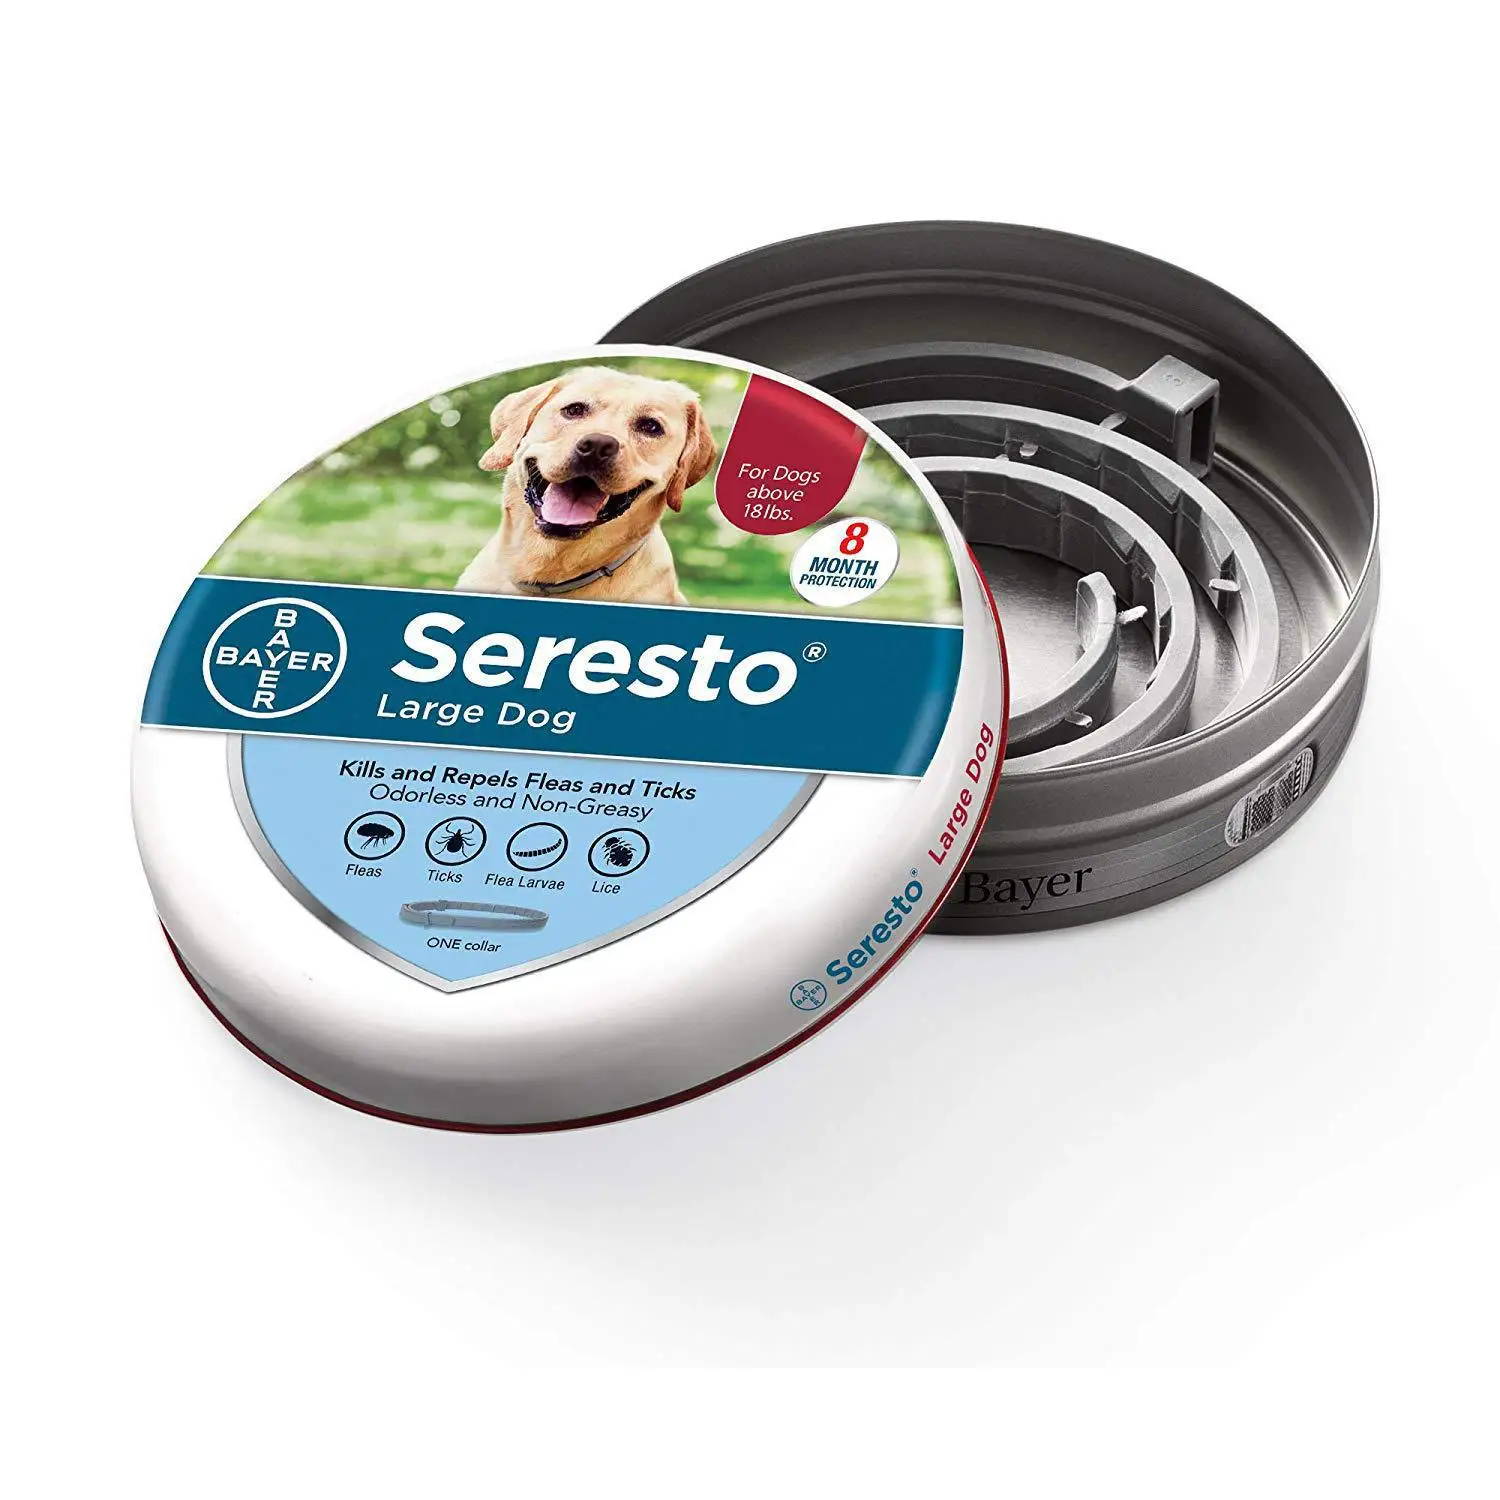 

Amazon Top Seller Prevention Adjustable Safe & Waterproof Pet Dog Cat Seresto Flea and Tick Collar, As picture